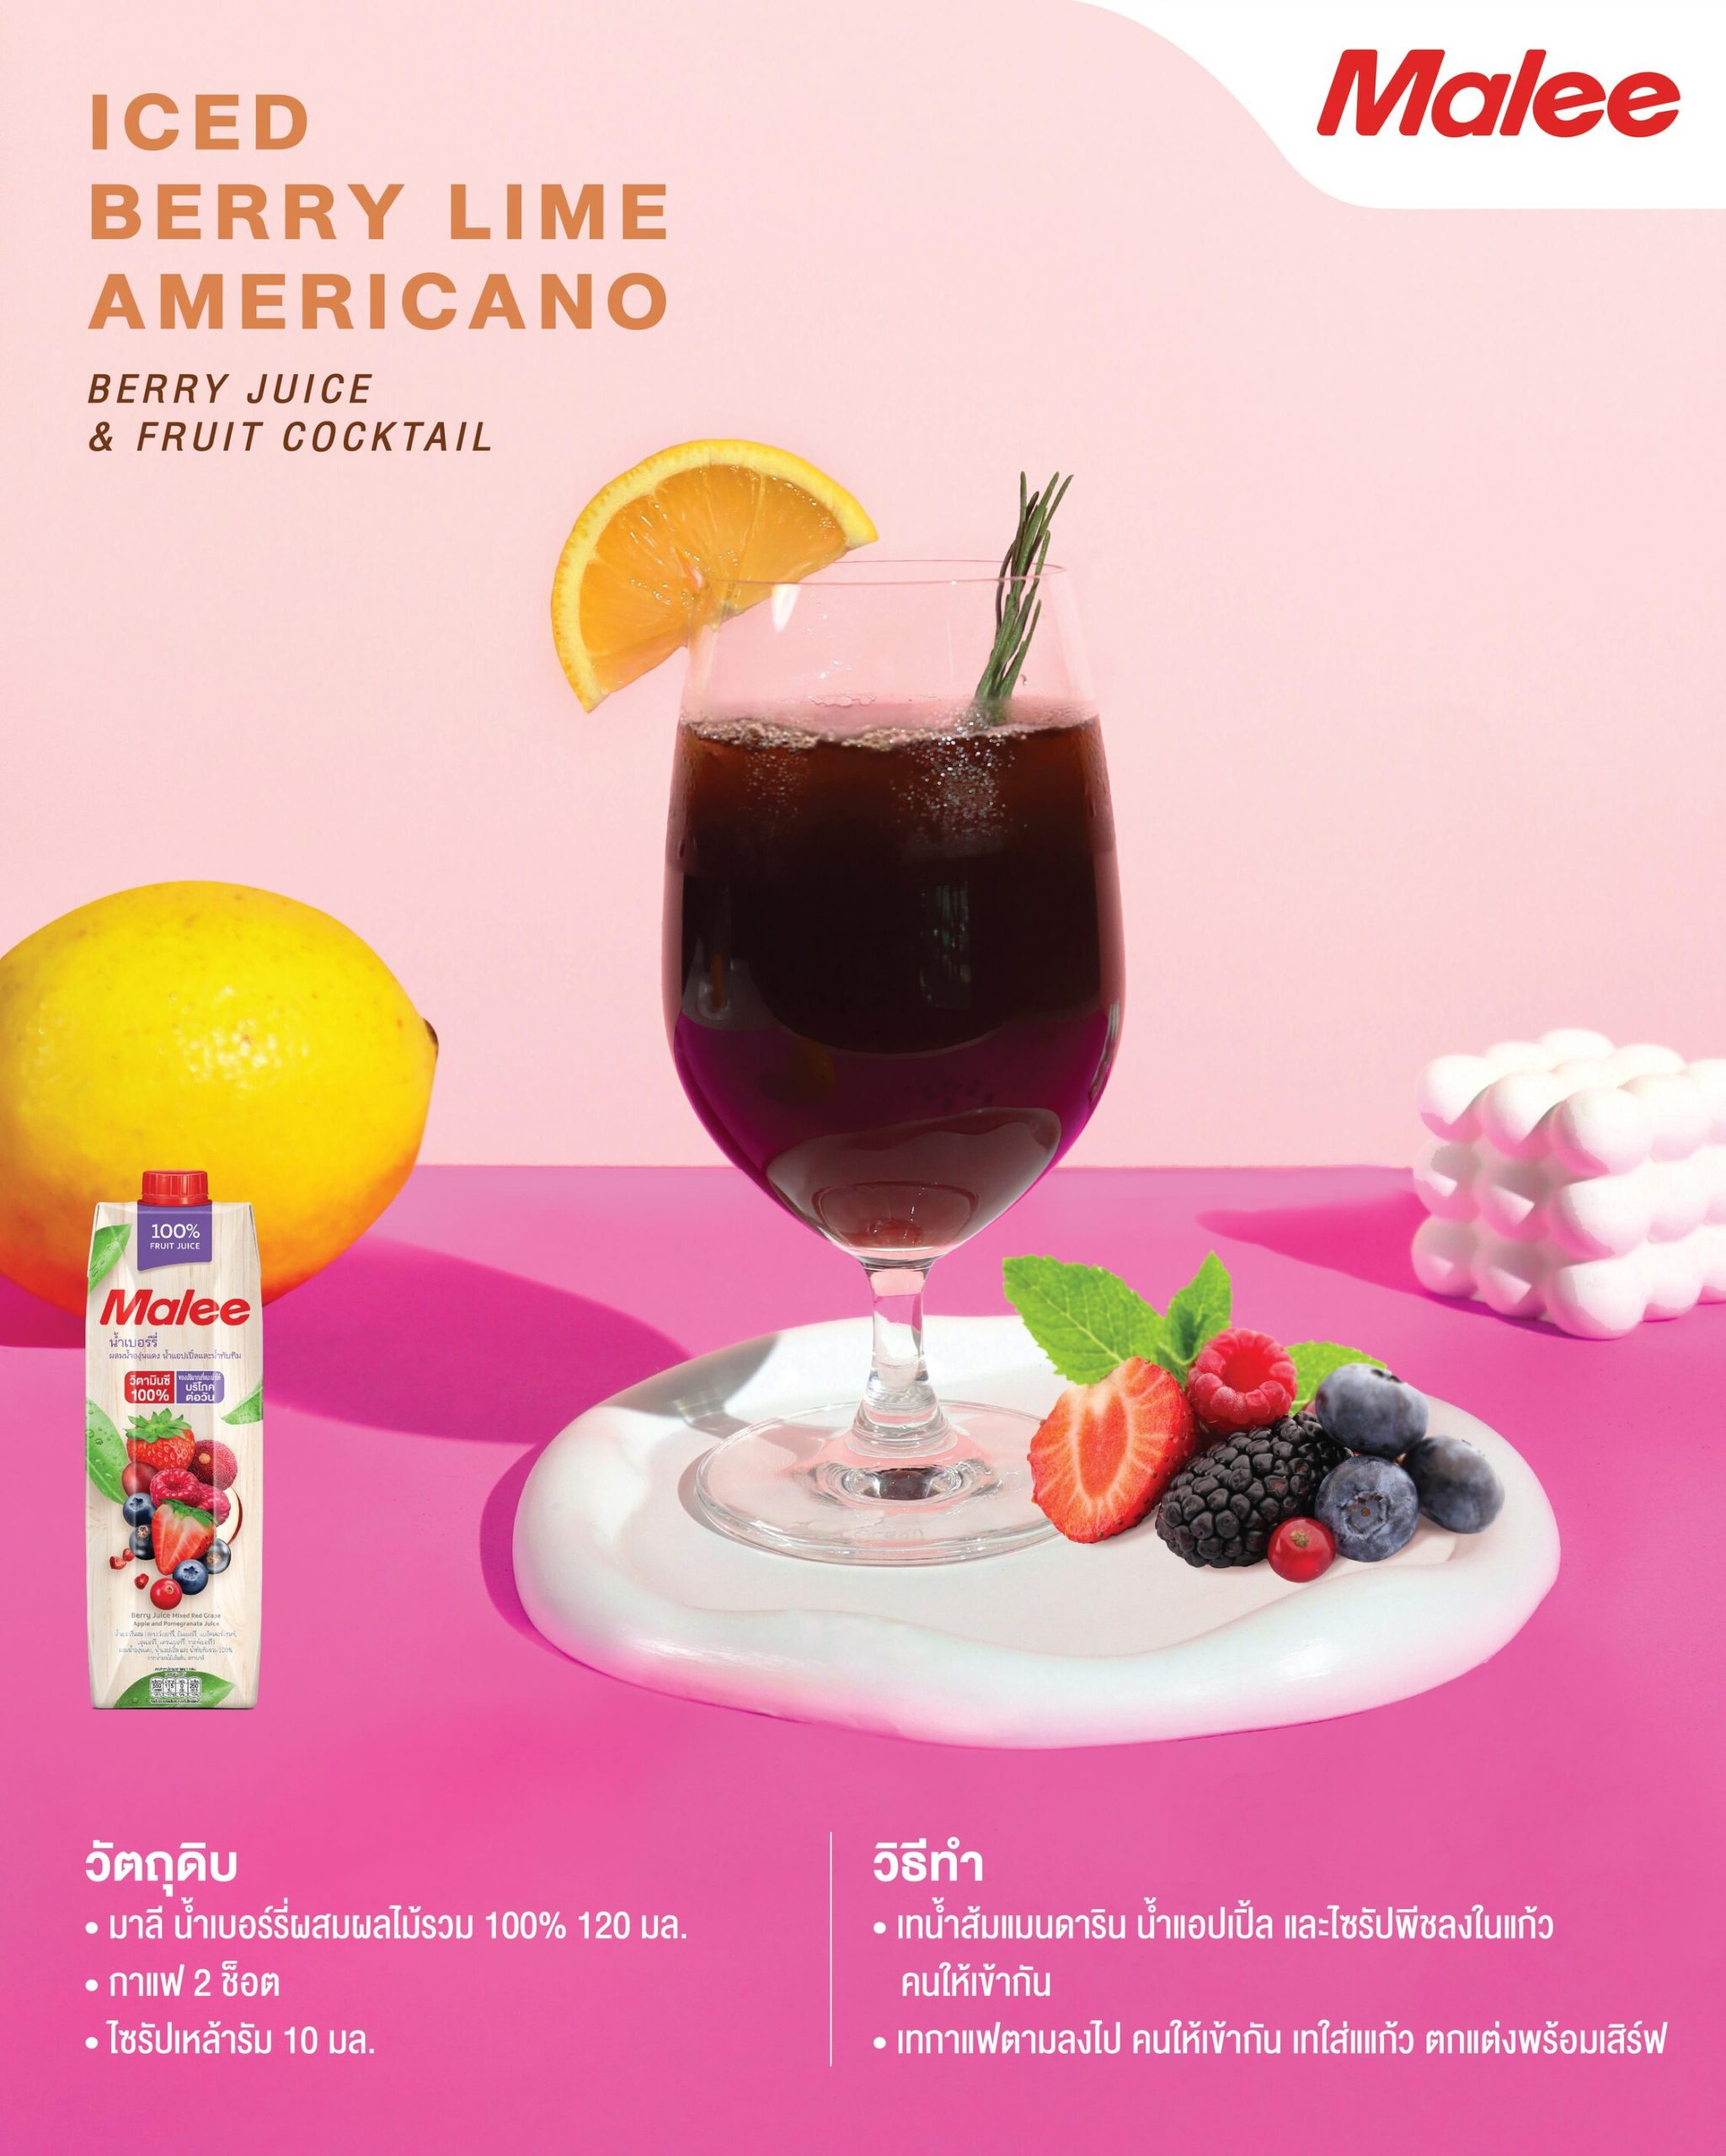 Iced Berry Lime Americano